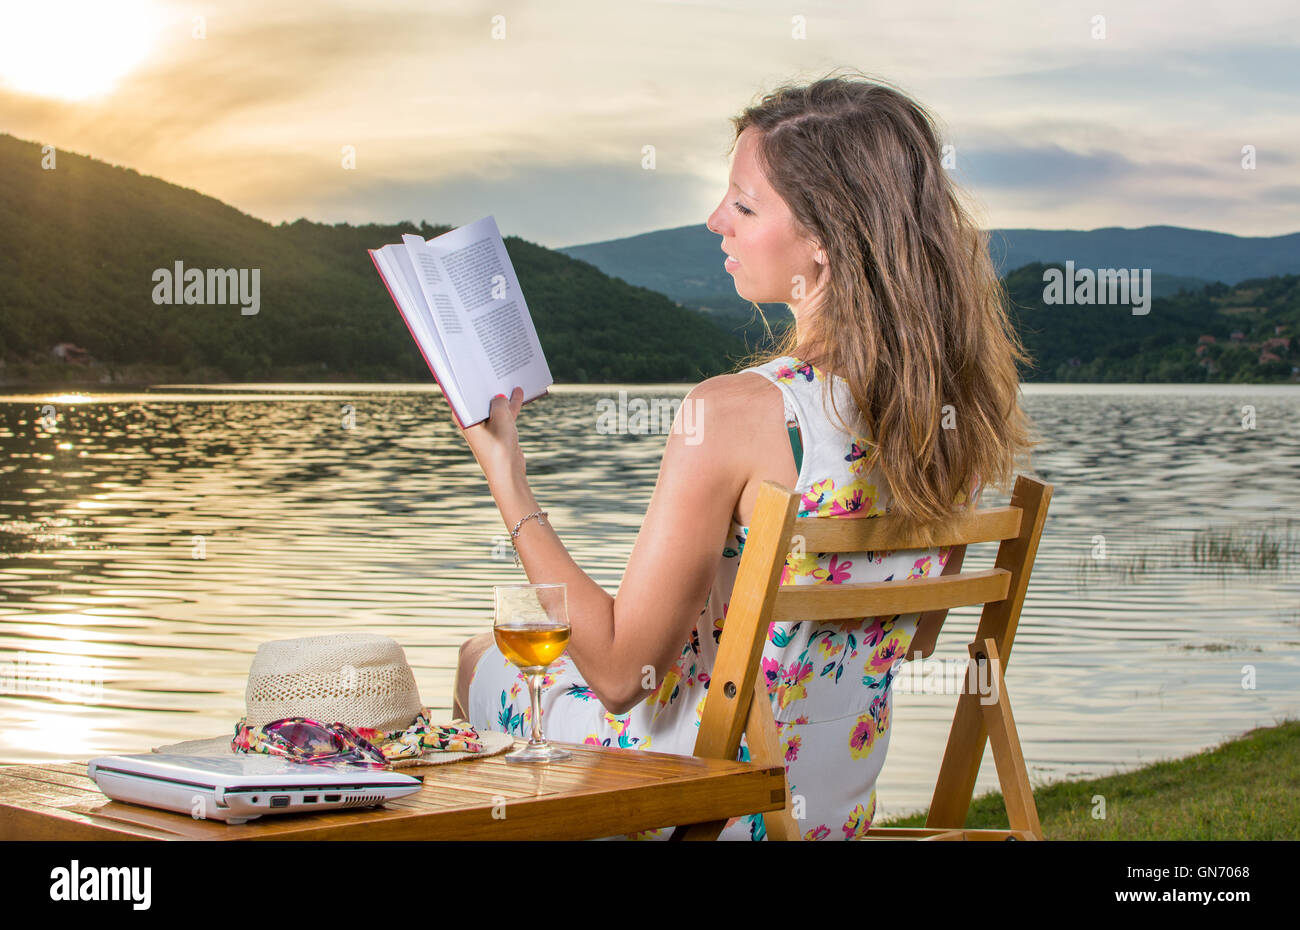 Young Woman Reading a book by the lake Banque D'Images